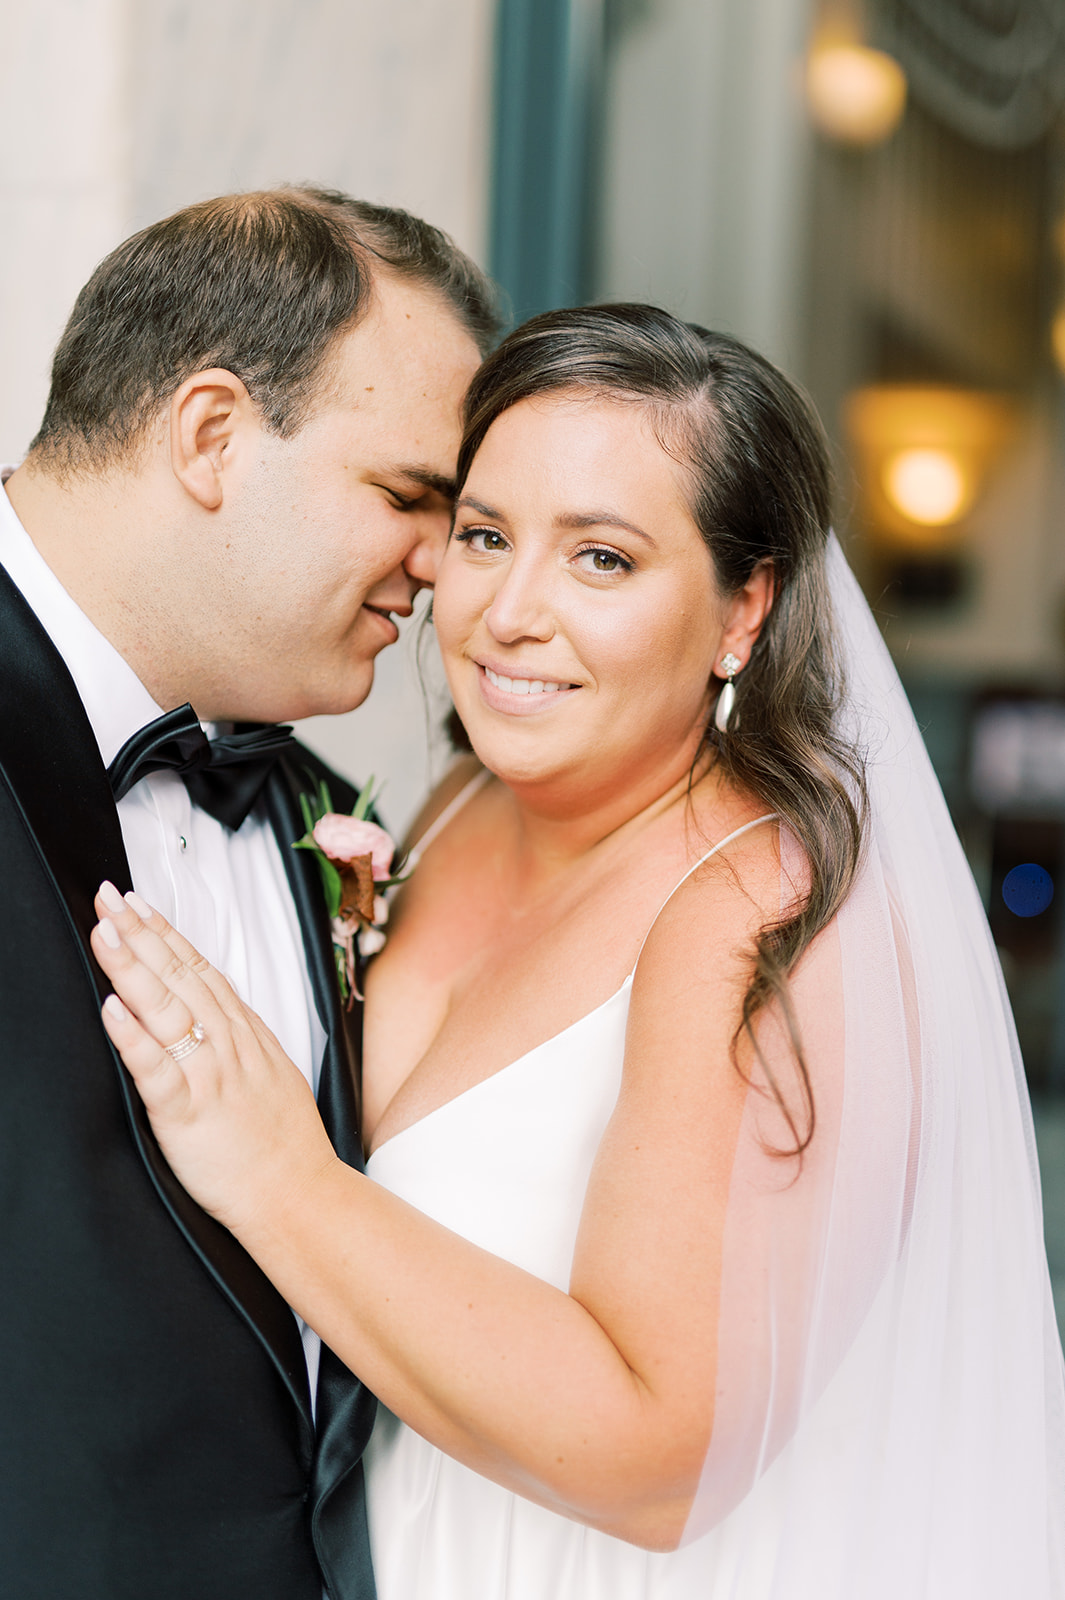 bride and groom embrace for this Classic and Airy AutumnWedding at Philadelphia’s Union Trust